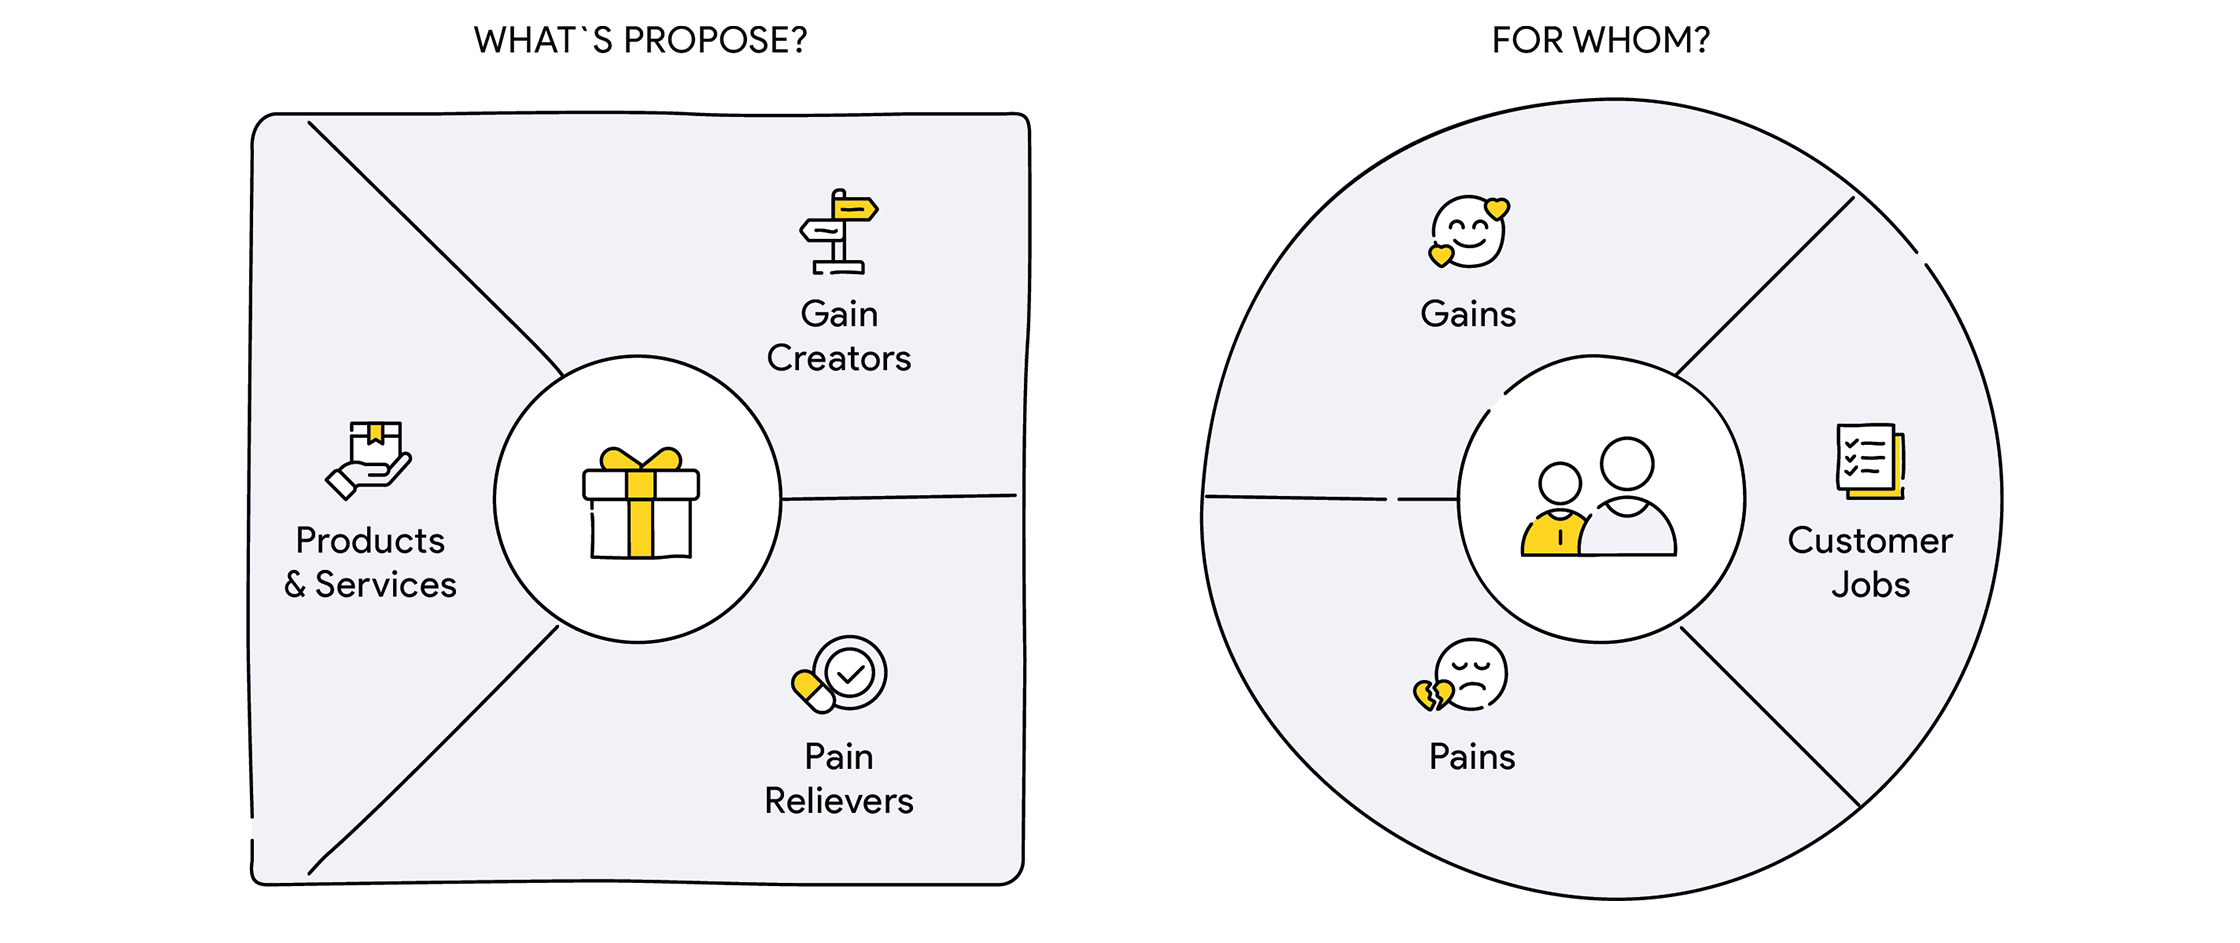 A practical guide to building a brand strategy - Value proposition canvas - Qubstudio